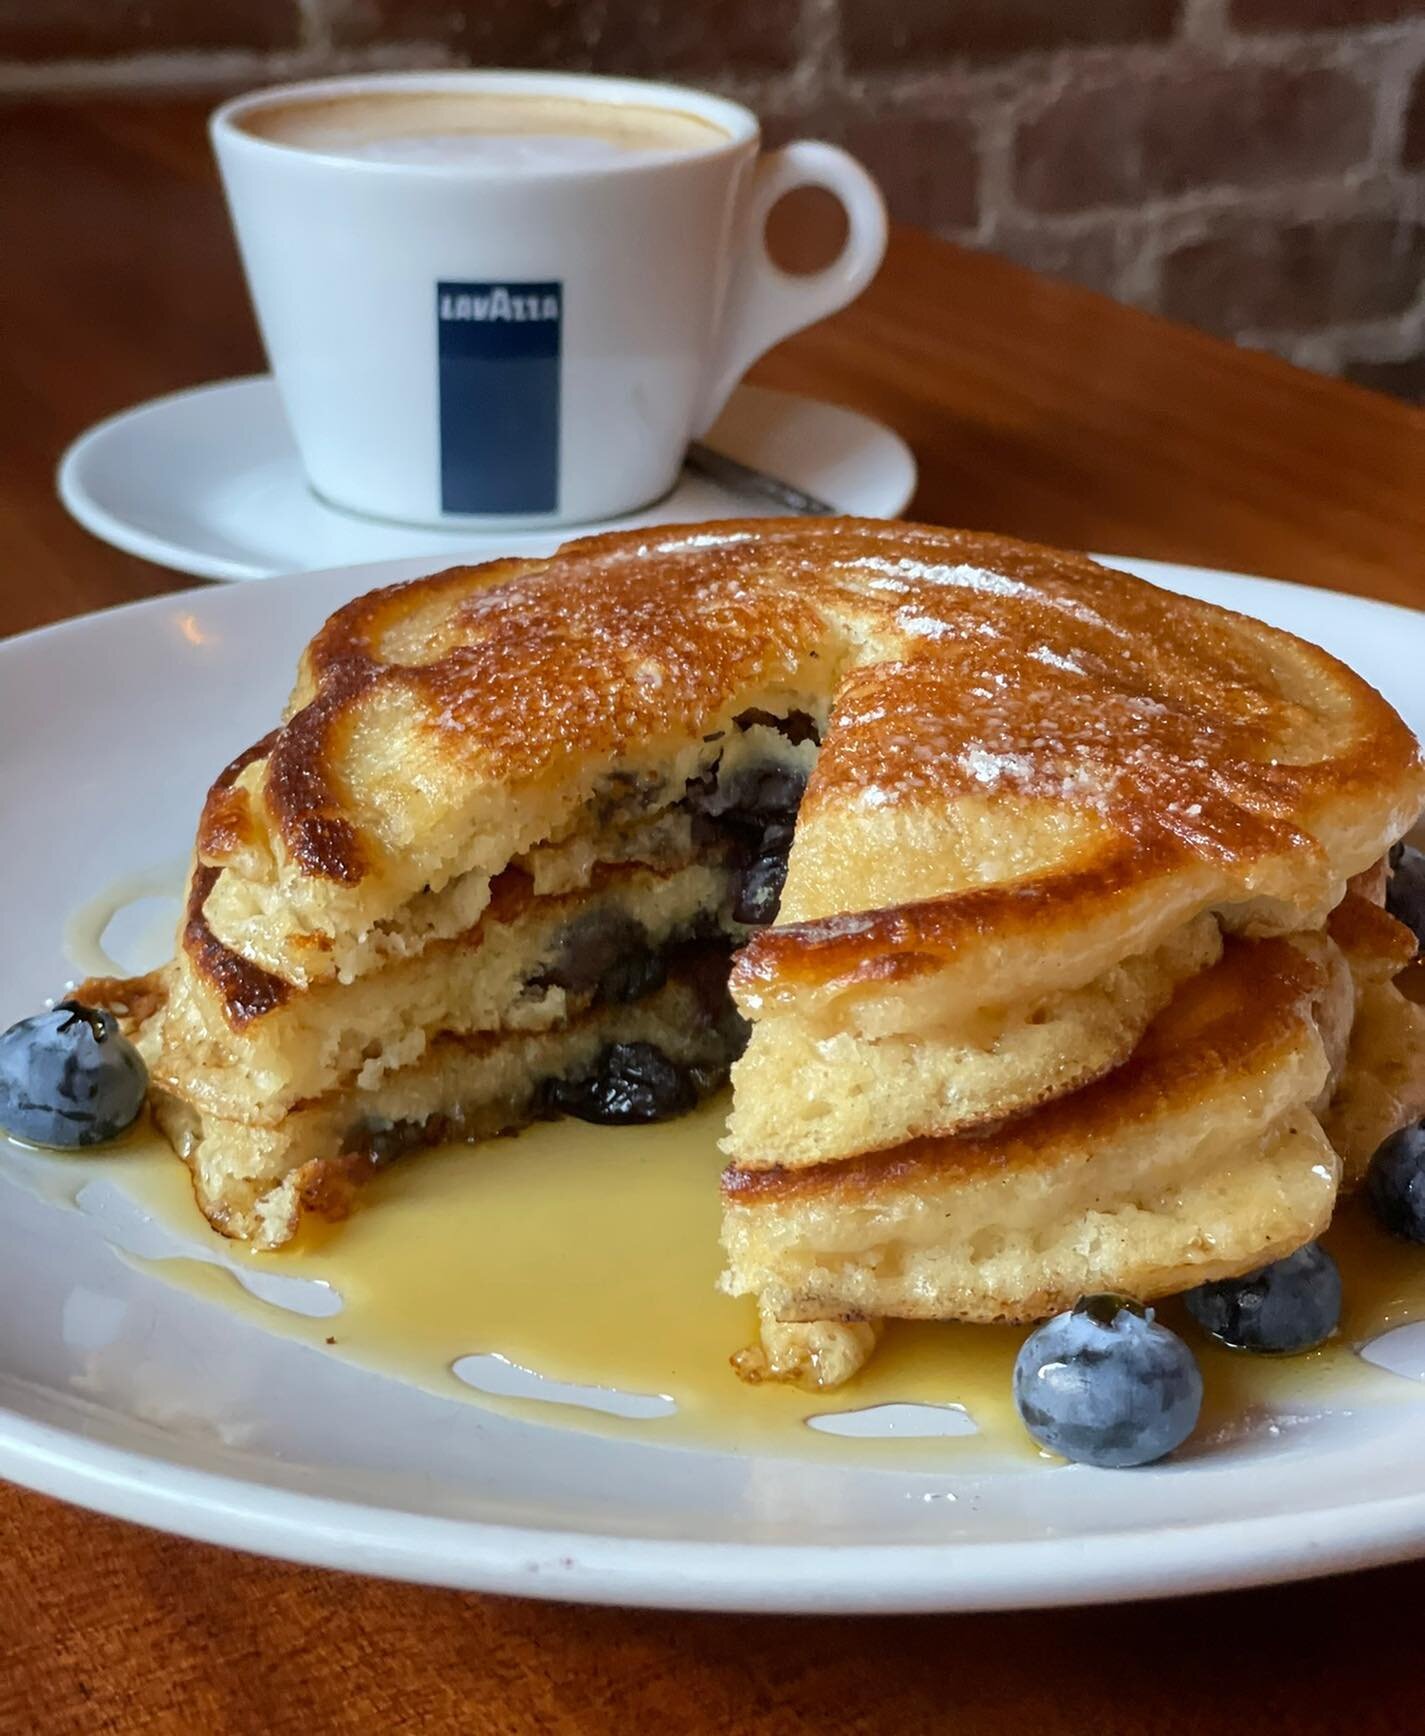 Sunrises and Blueberry Pancakes 🥞 🌅 &mdash; If you didn&rsquo;t know this is the place to be this weekend for BRUNCH and LUNCH &mdash; Always with a SMILE 😊 
.
.
.
.
.
.
#brooklyn #bayridge #apple #blueberry #pancakes #nyc #brunch #brunchboys